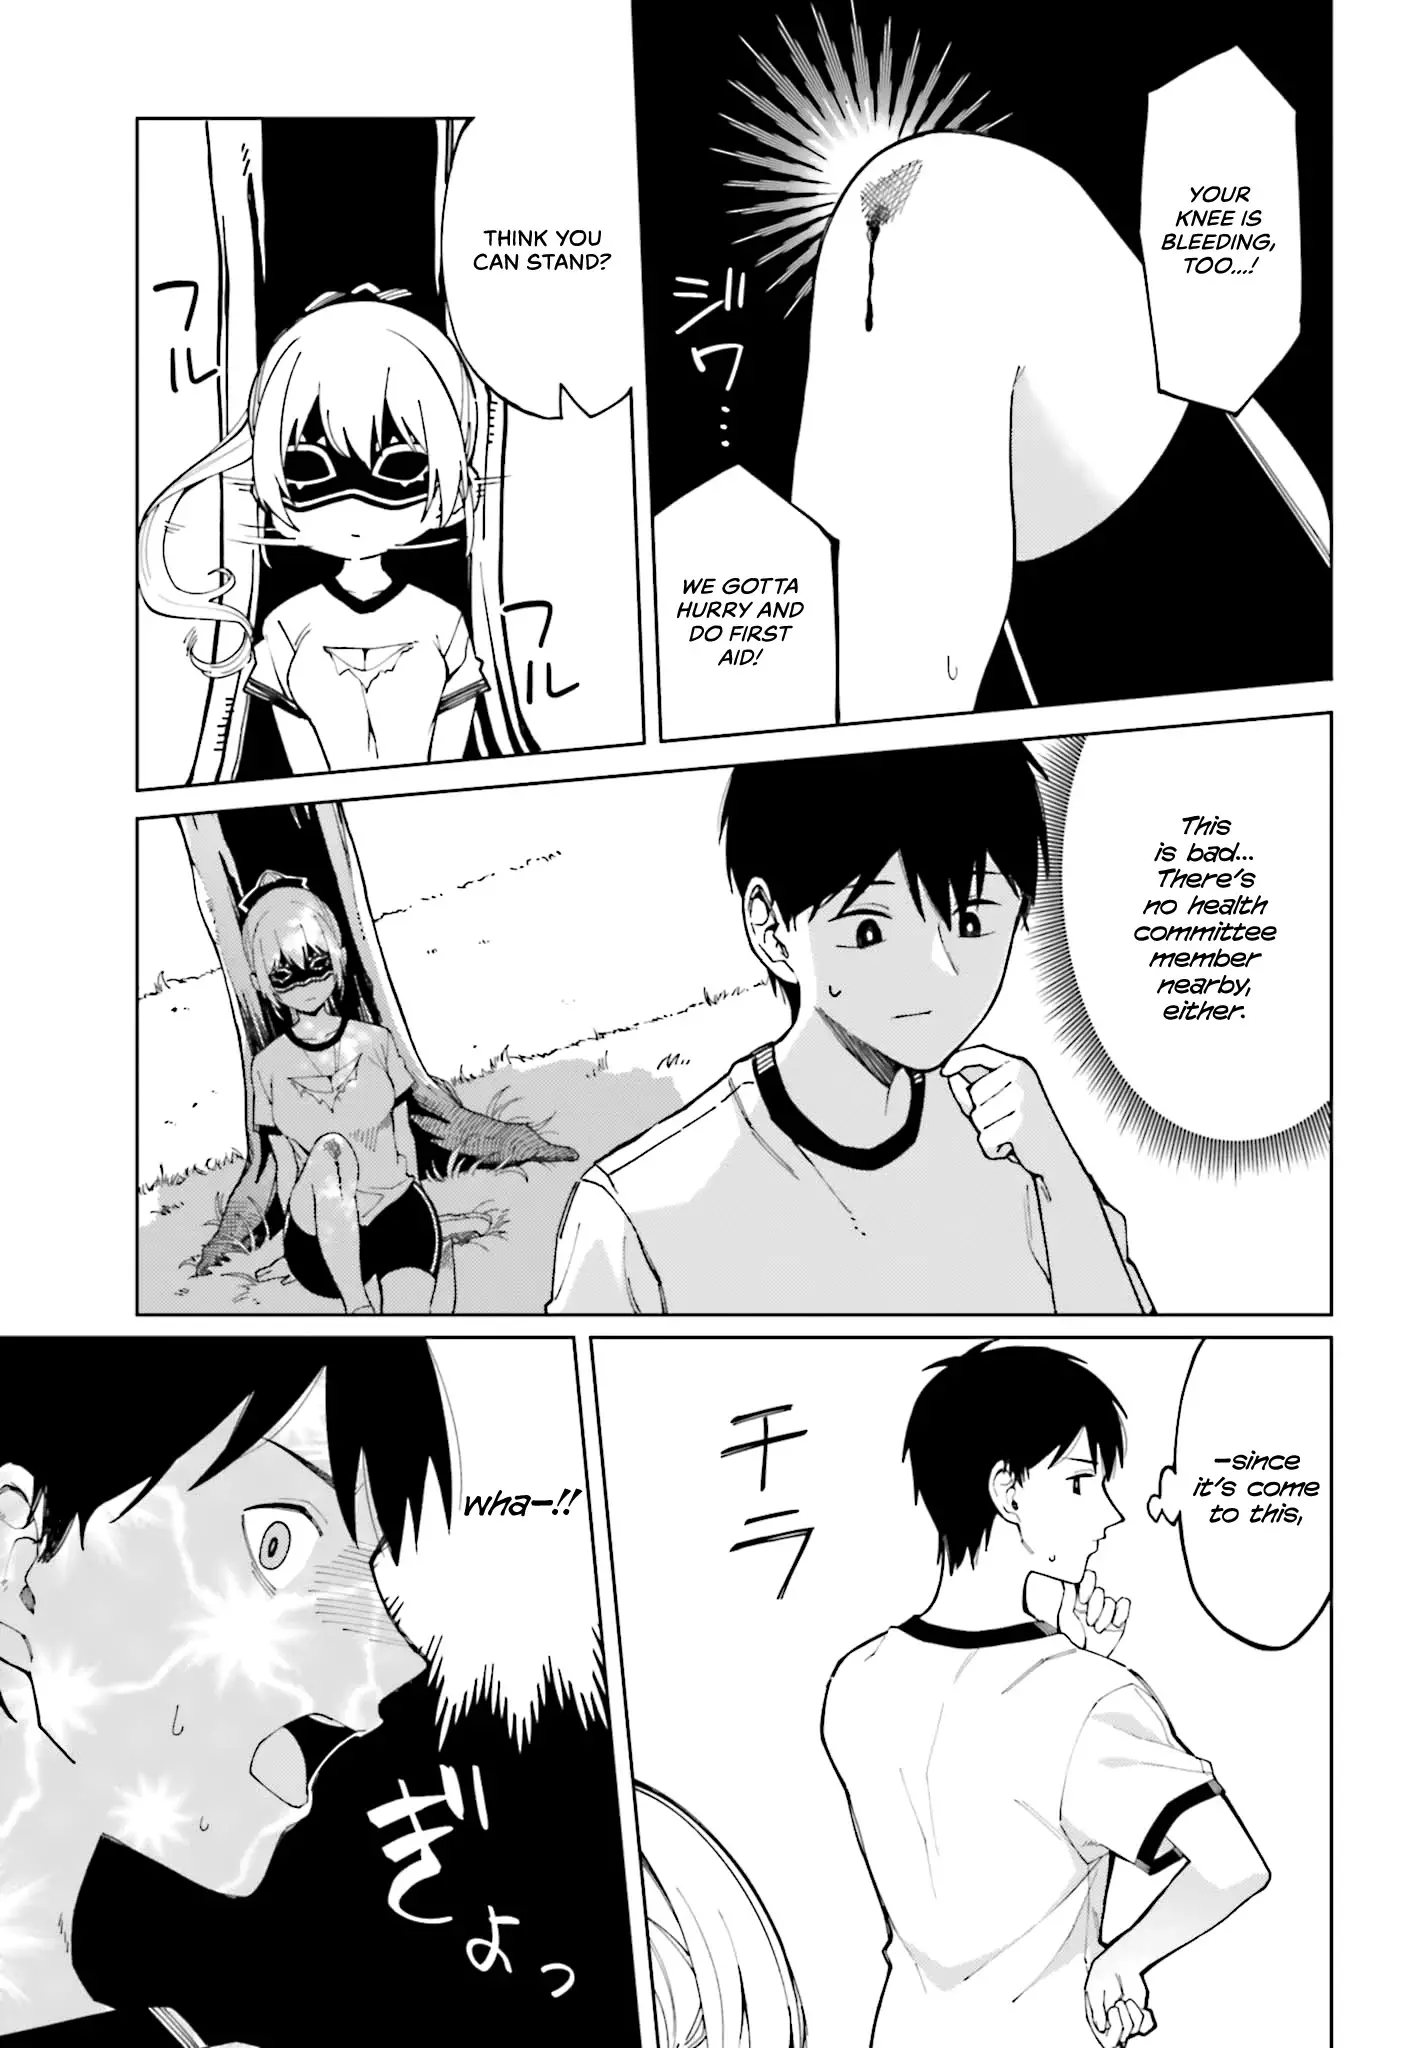 I Don't Understand Shirogane-San's Facial Expression At All - 2 page 9